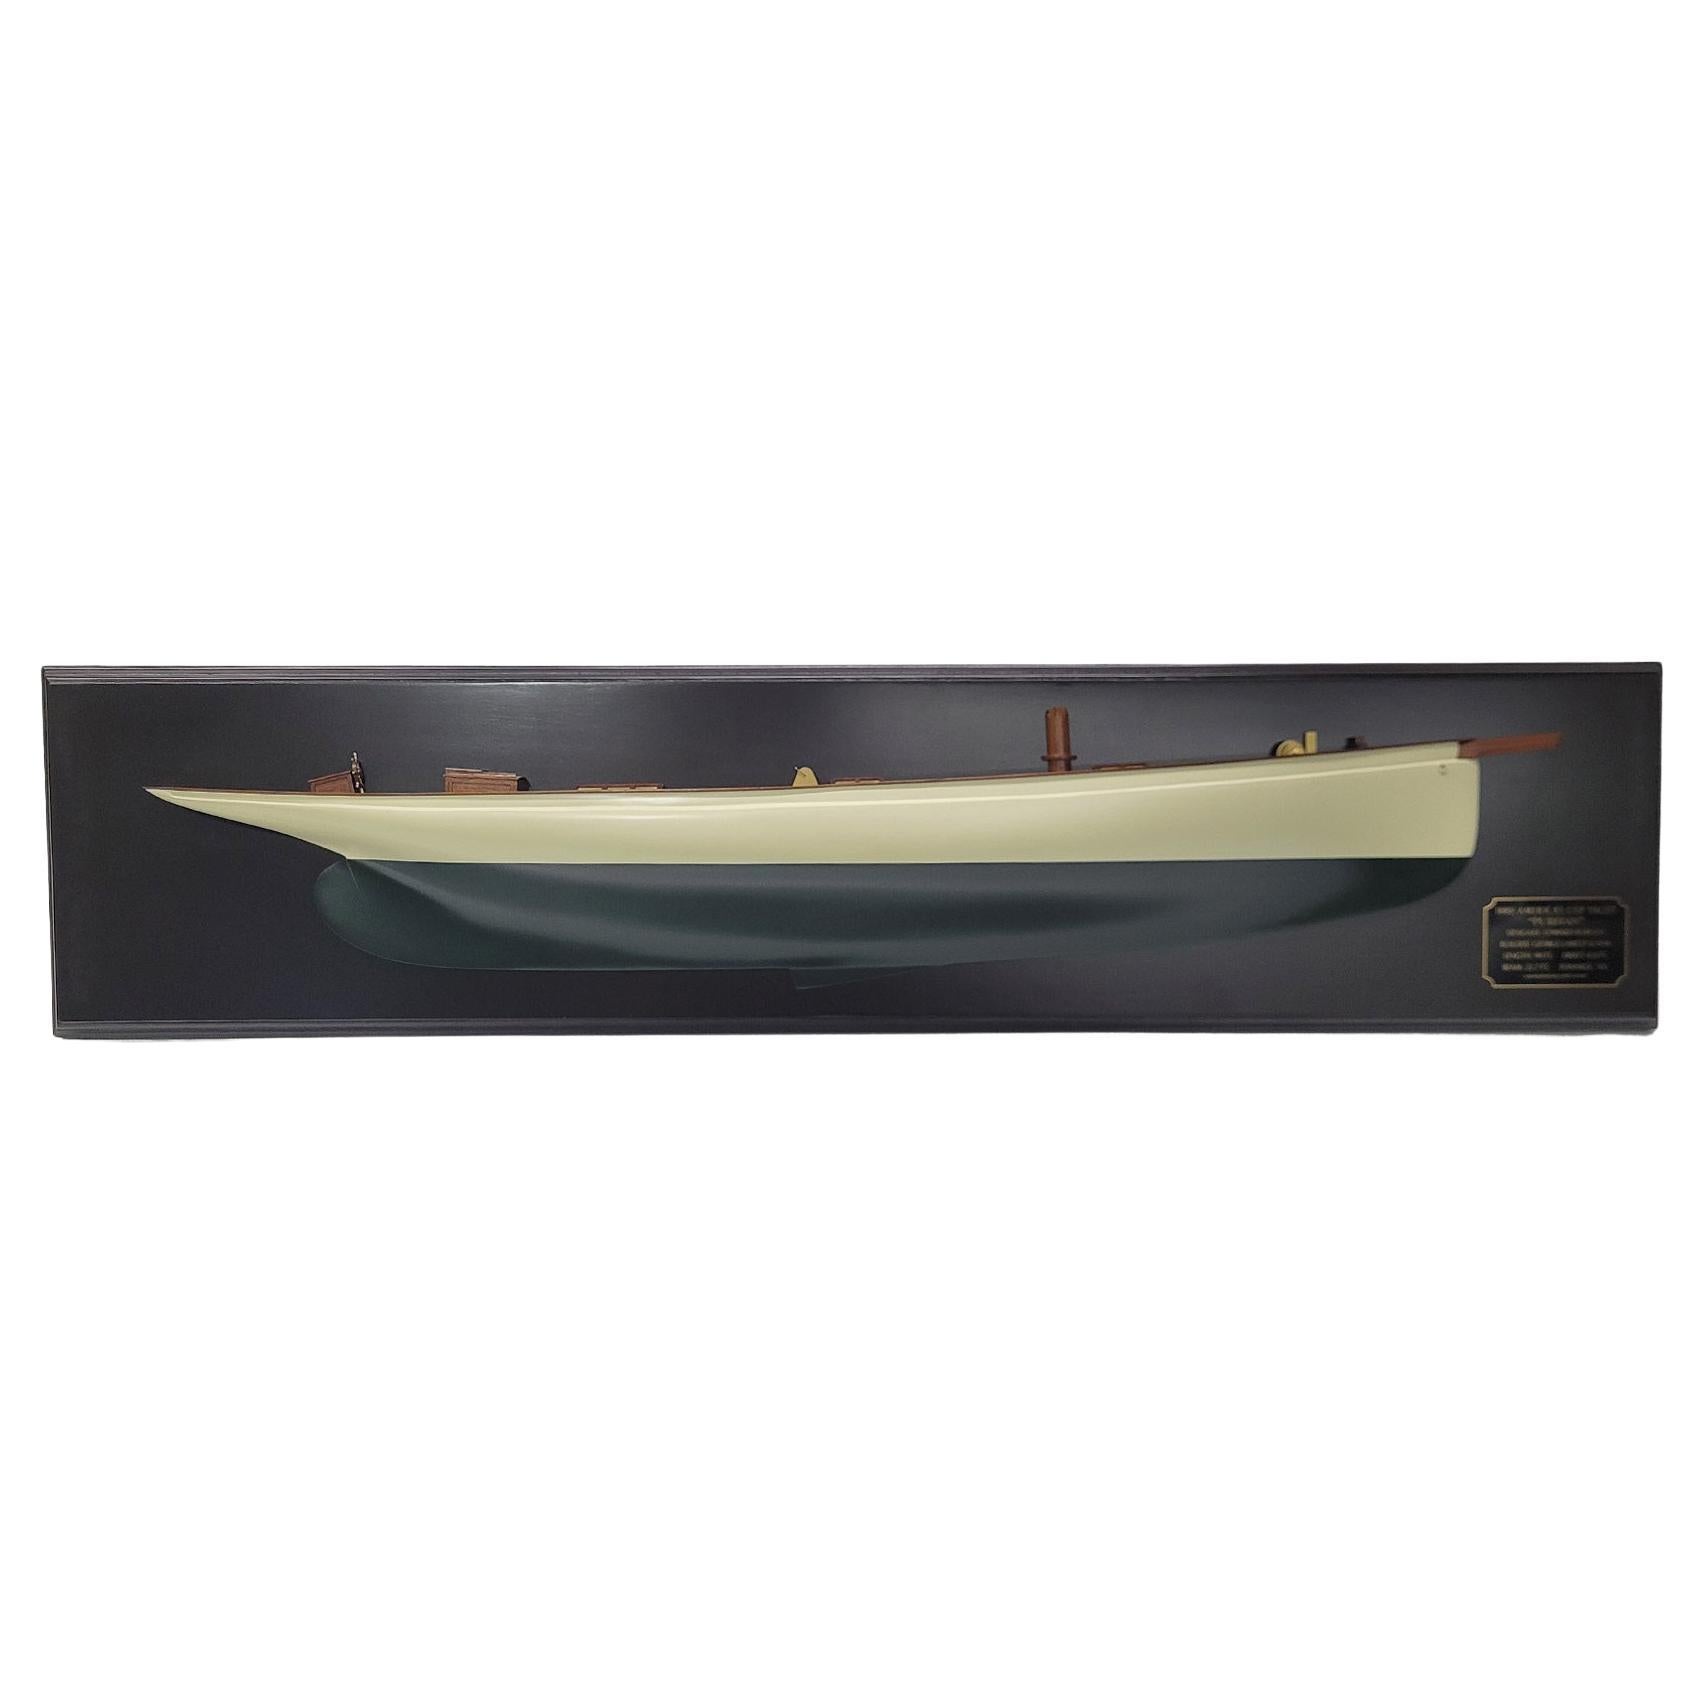 Scale Half Model Of Americas Cup Yacht "Puritan" For Sale